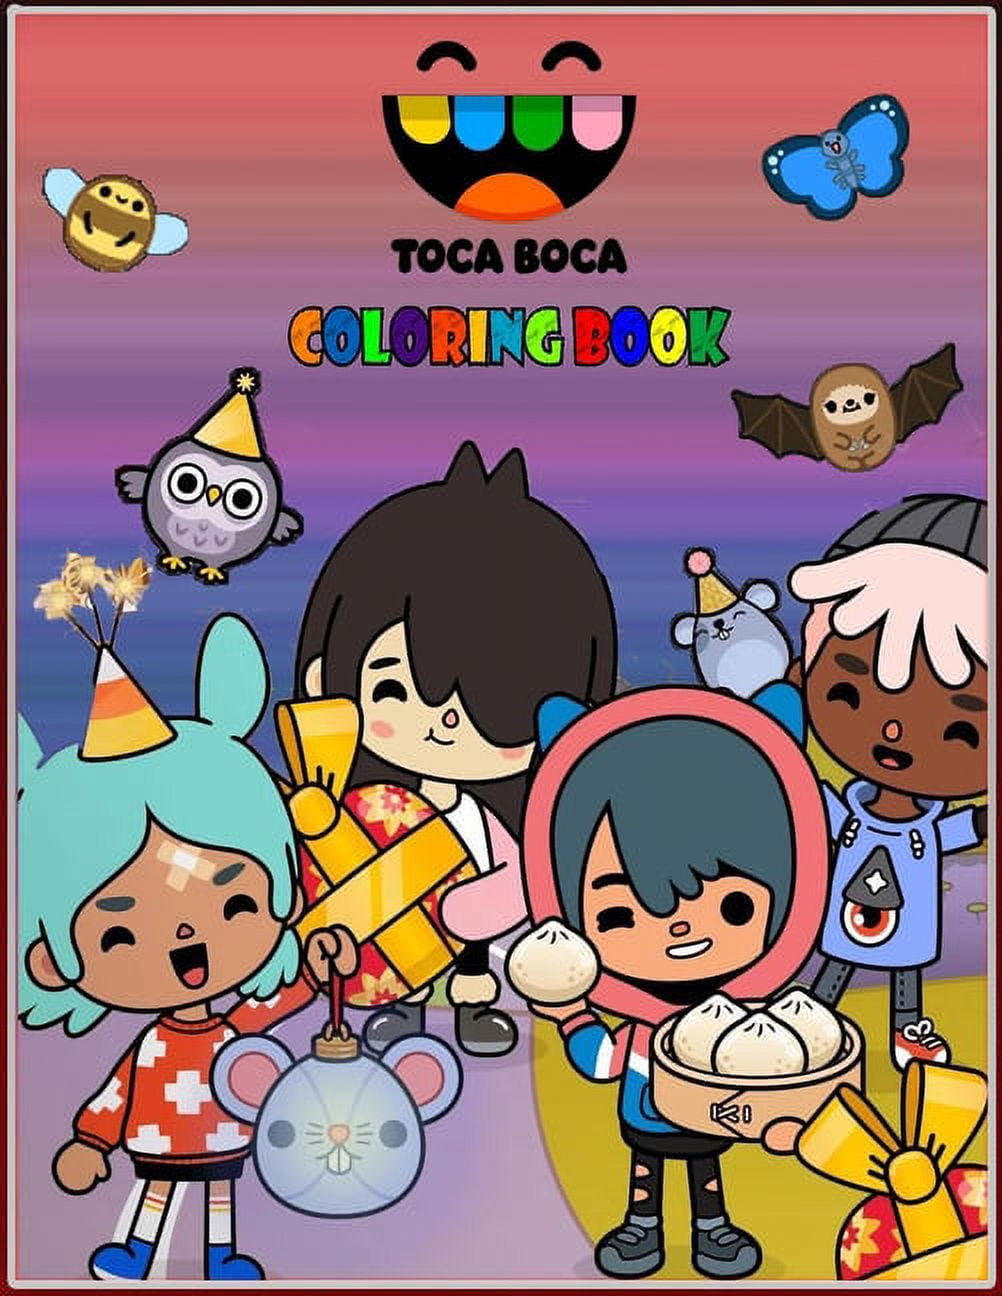 Toca LIFE WORLD Coloring Book: Premium Toca Boca Coloring Books For Adults  And Kids (German Edition) by Patimeela, PATRYCJA 